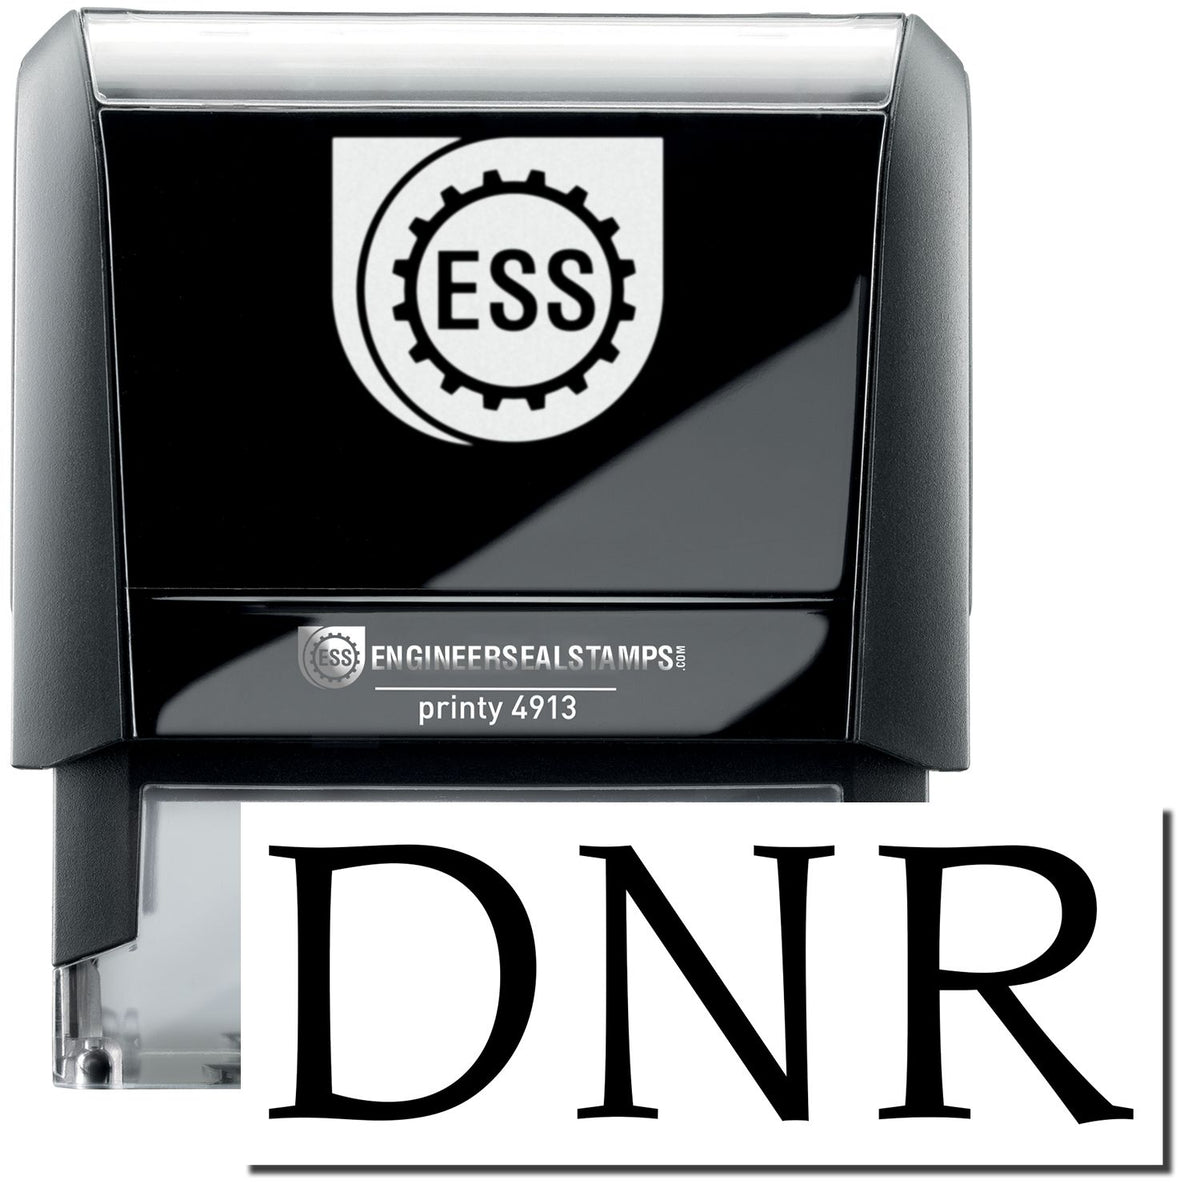 A self-inking stamp with a stamped image showing how the text &quot;DNR&quot; in a large bold font is displayed by it.